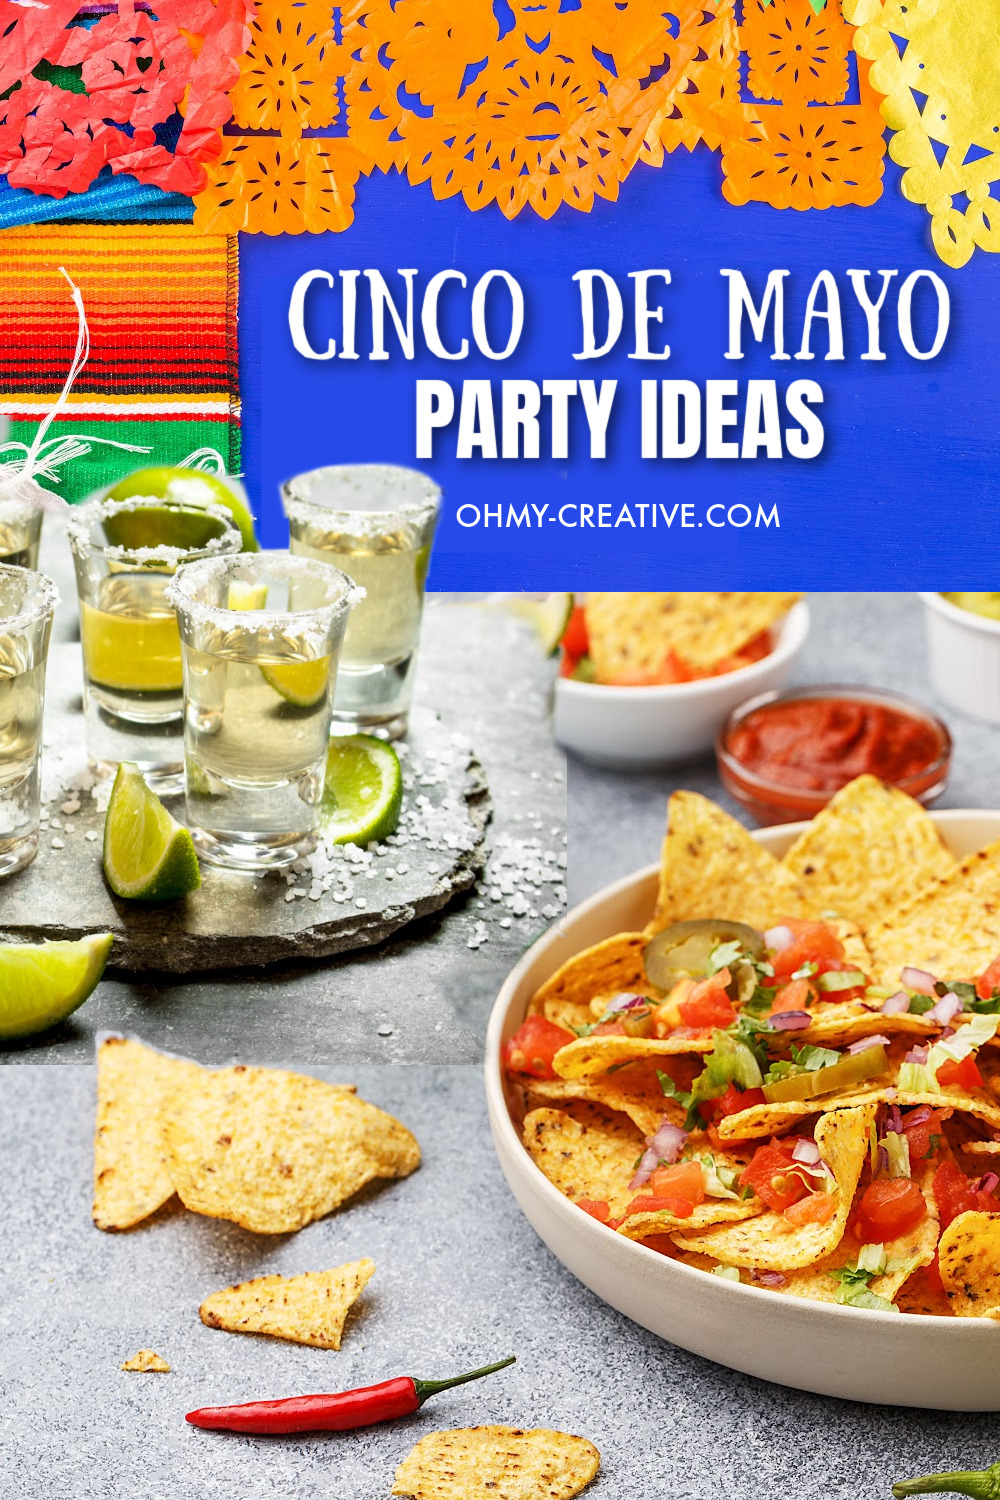 A collage of Cinco de Mayo party ideas including nachos, drinks and decorations.